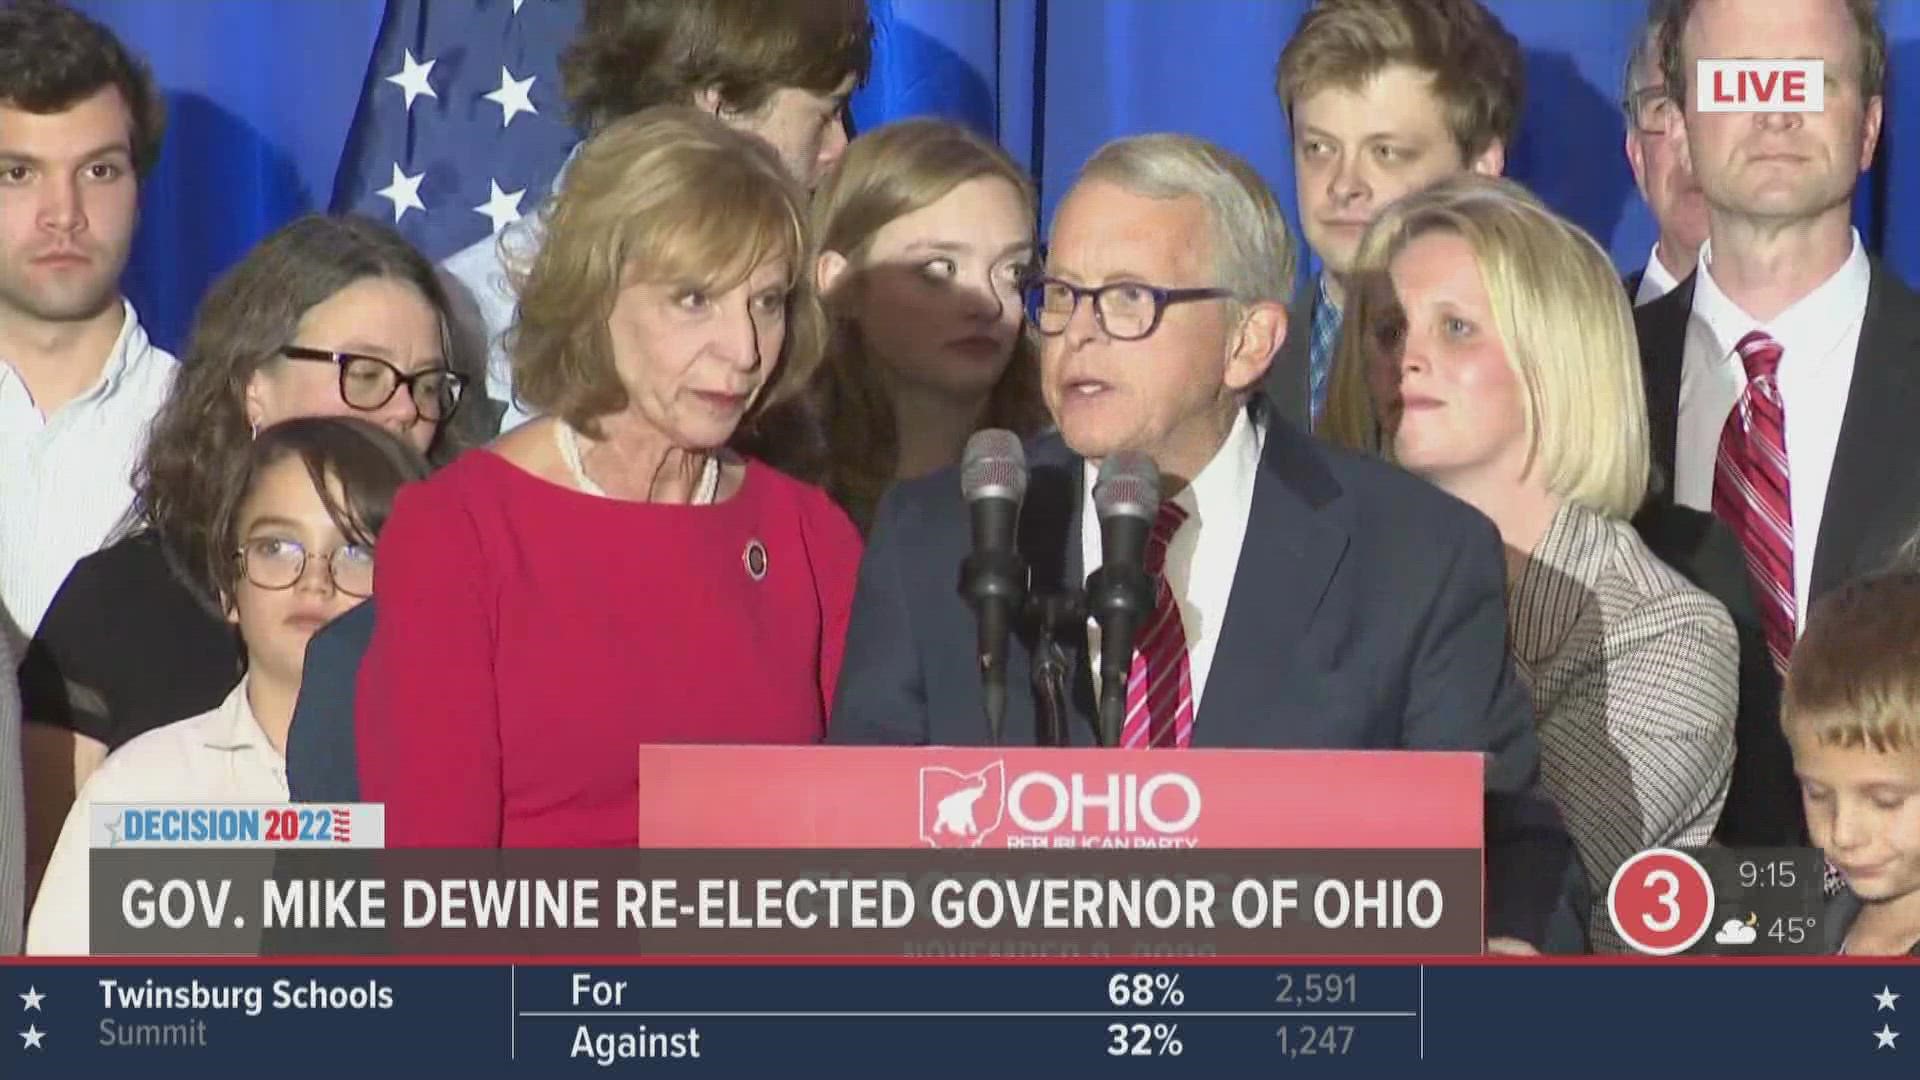 The Republican DeWine, one of the most accomplished politicians in the state's history, handily defeated Democrat and former Dayton Mayor Nan Whaley.